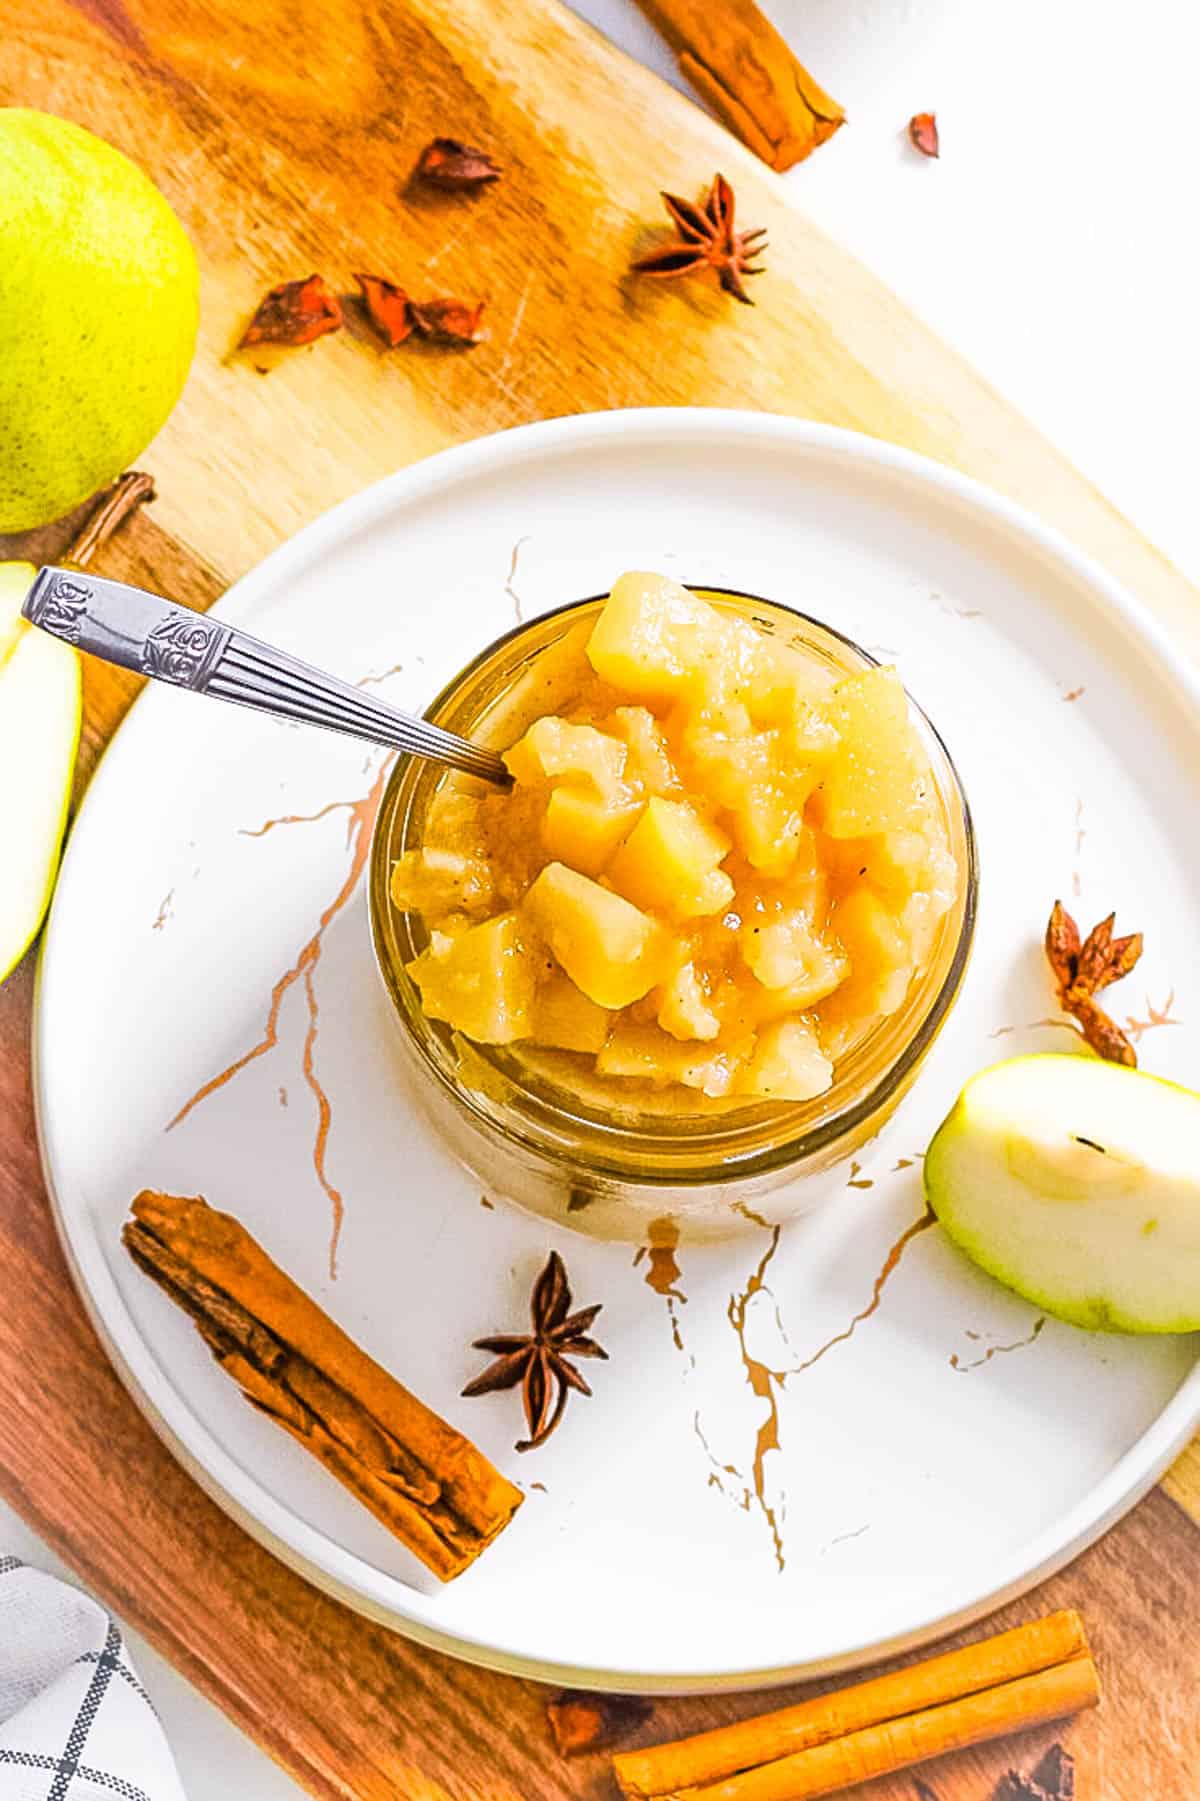 Cinnamon pear compote preserves in a glass jar with a spoon.